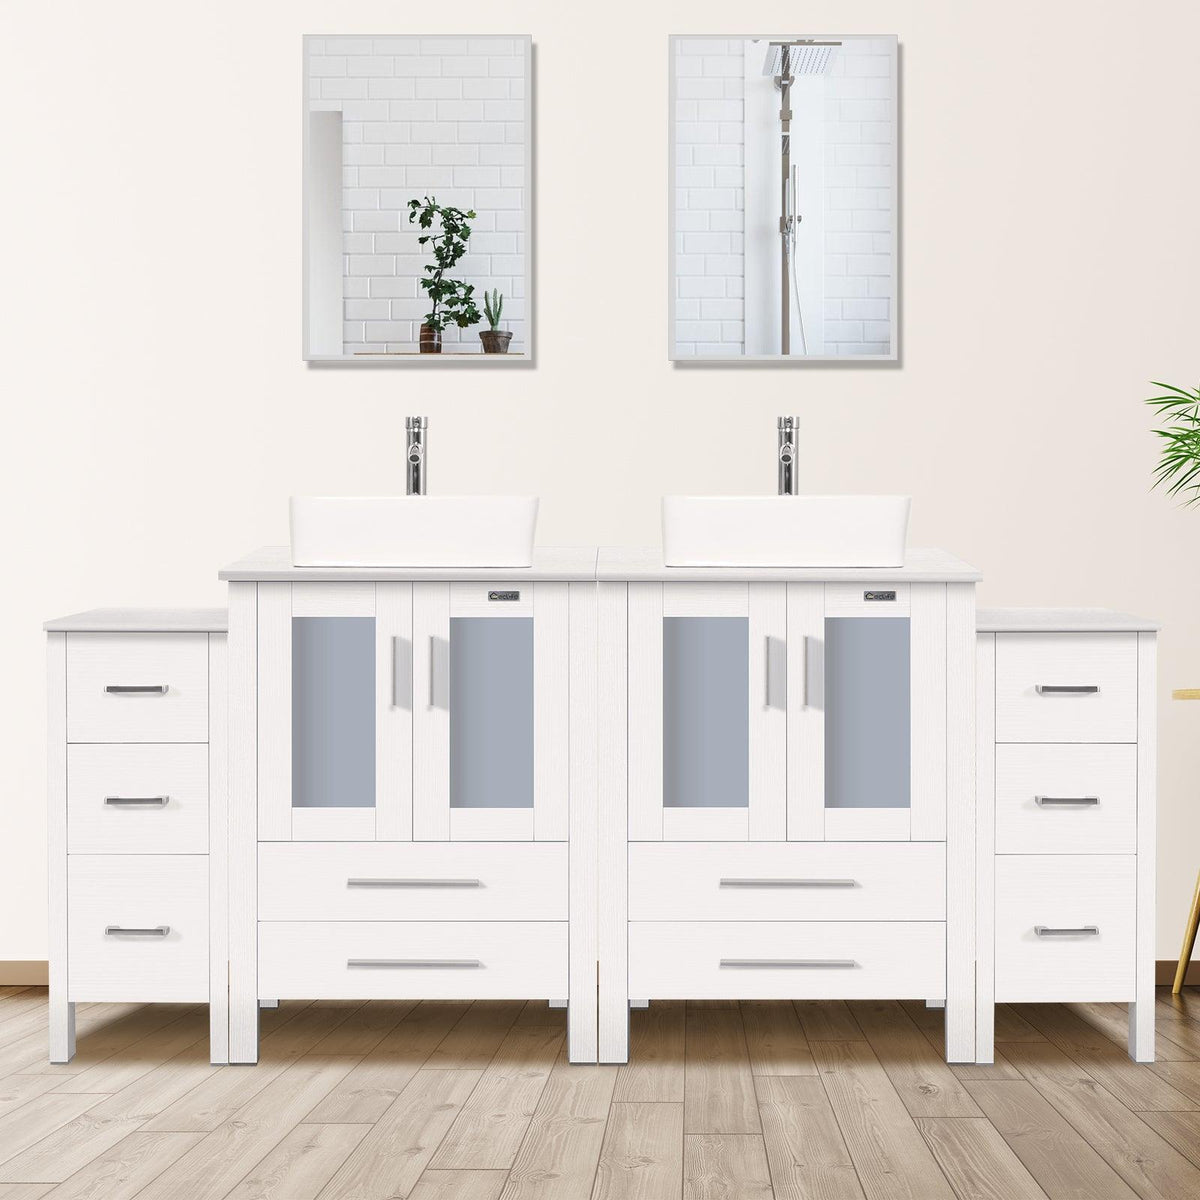 Eclife 72” White Double Sinks Modern Bathroom Vanity Sink Combo W/Side Cabinet, with Mirror